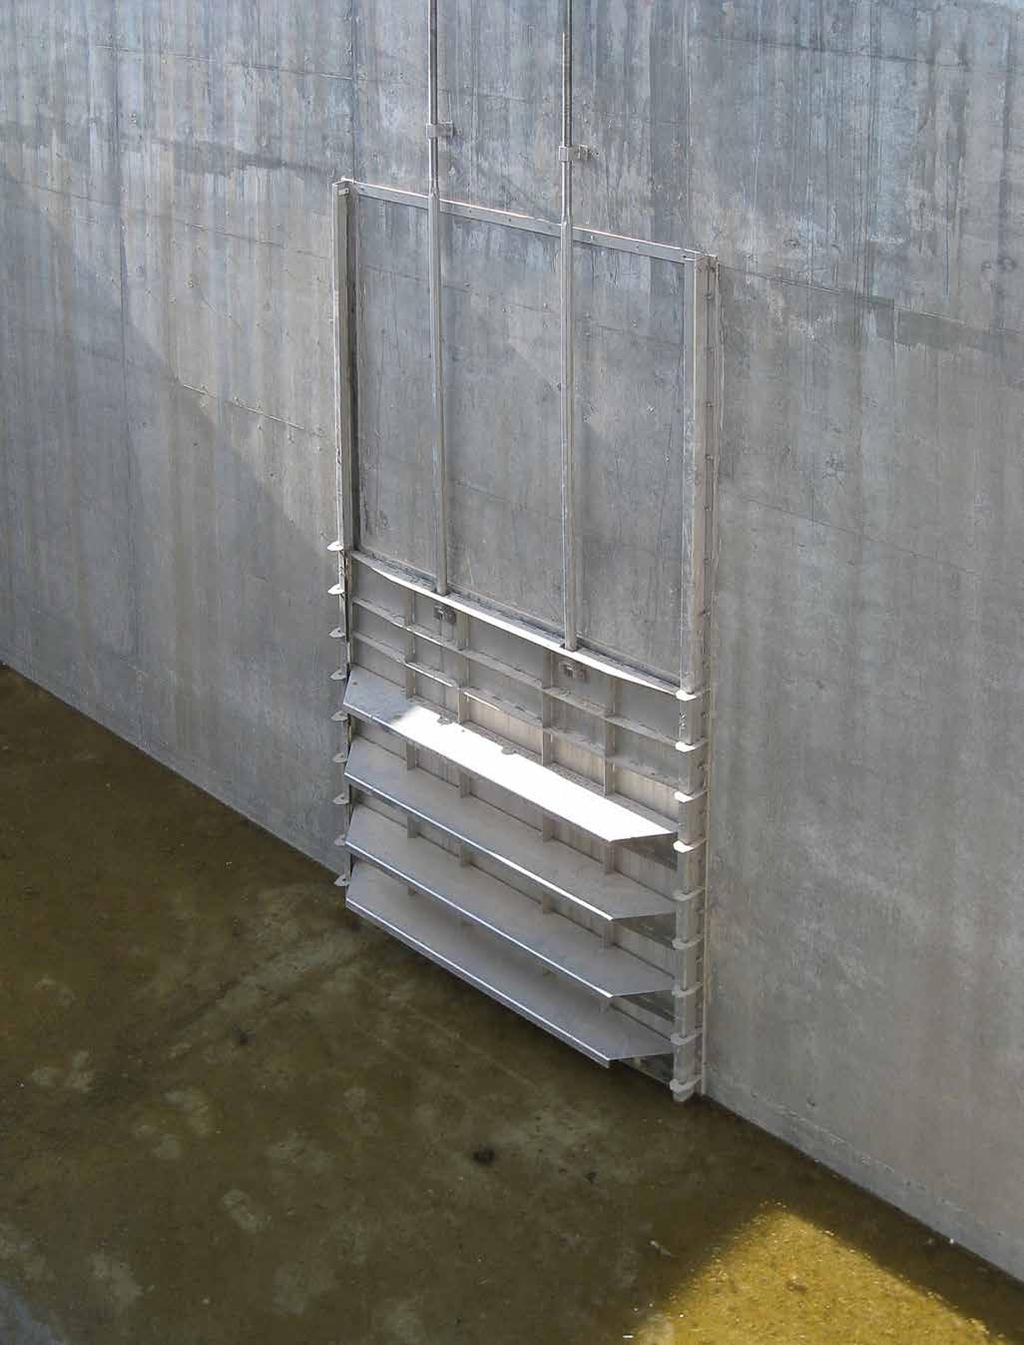 SELECTING YOUR PENSTOCK TYPE 1.